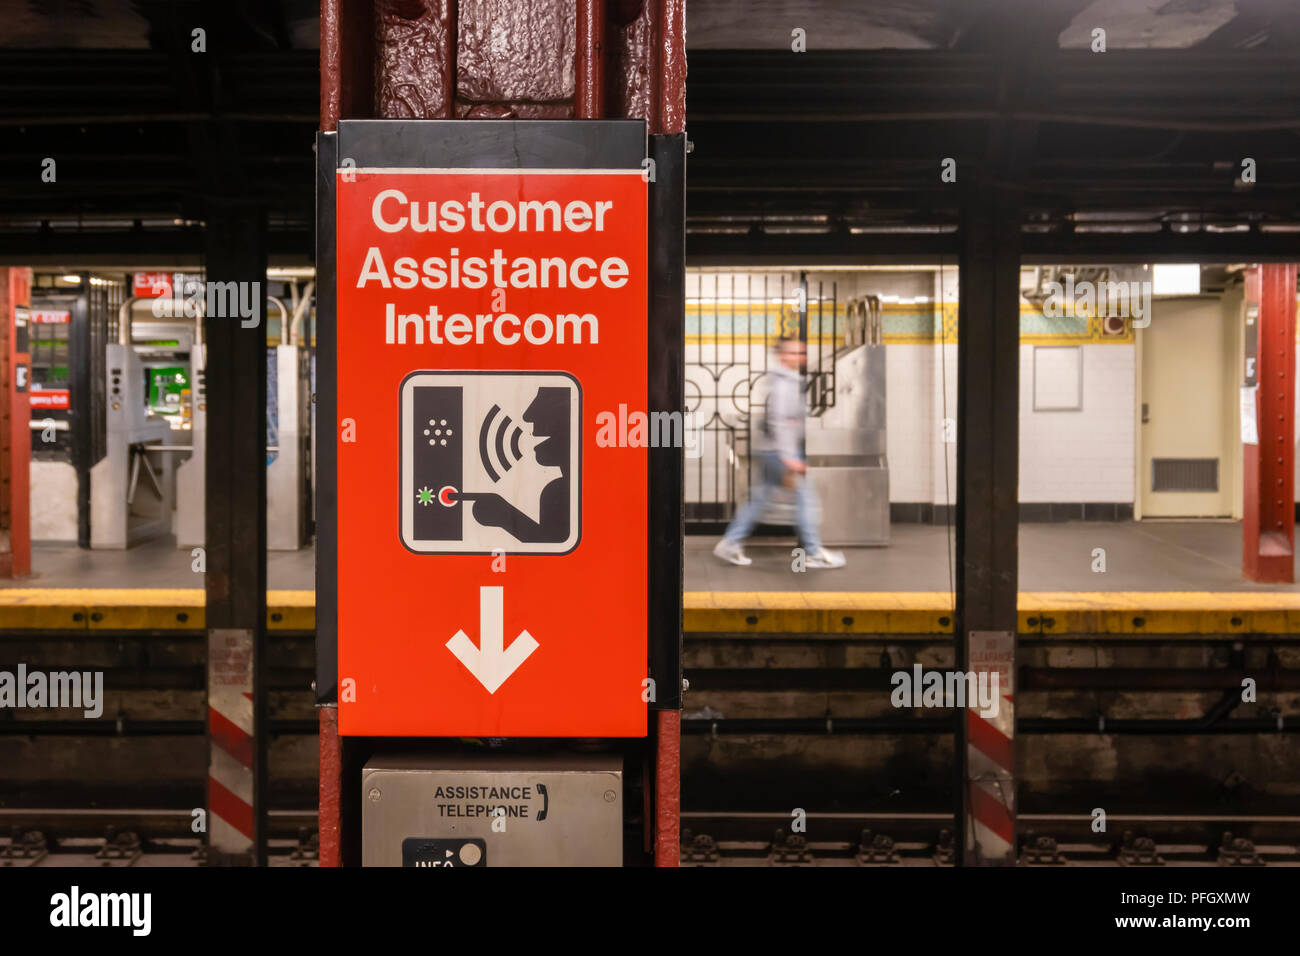 Customer assistance intercom in a subway station in New York City Stock Photo